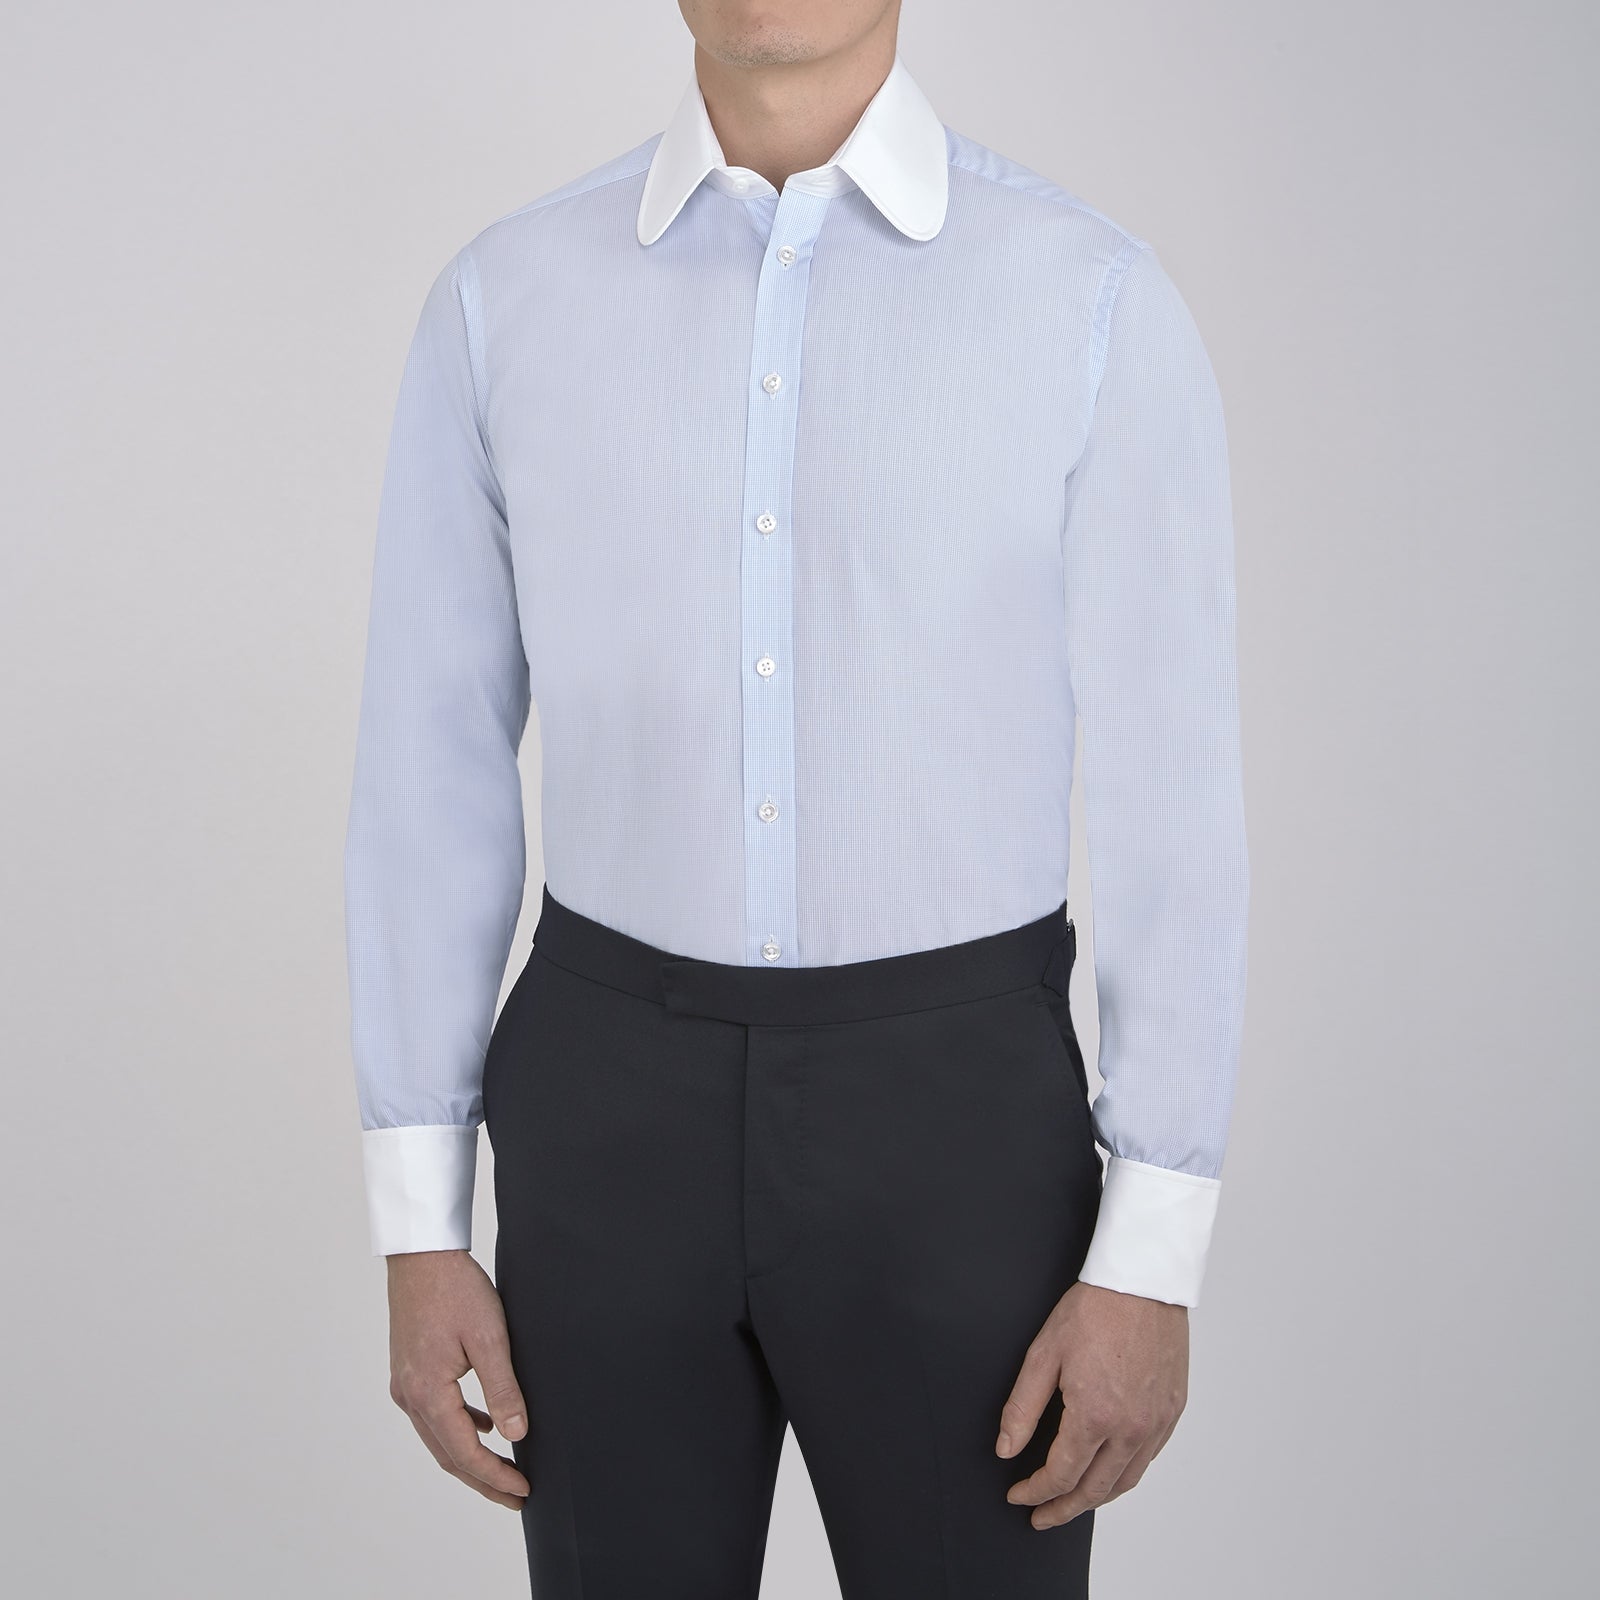 The Great Gatsby Cotton Shirt with White Collar and Double Cuffs